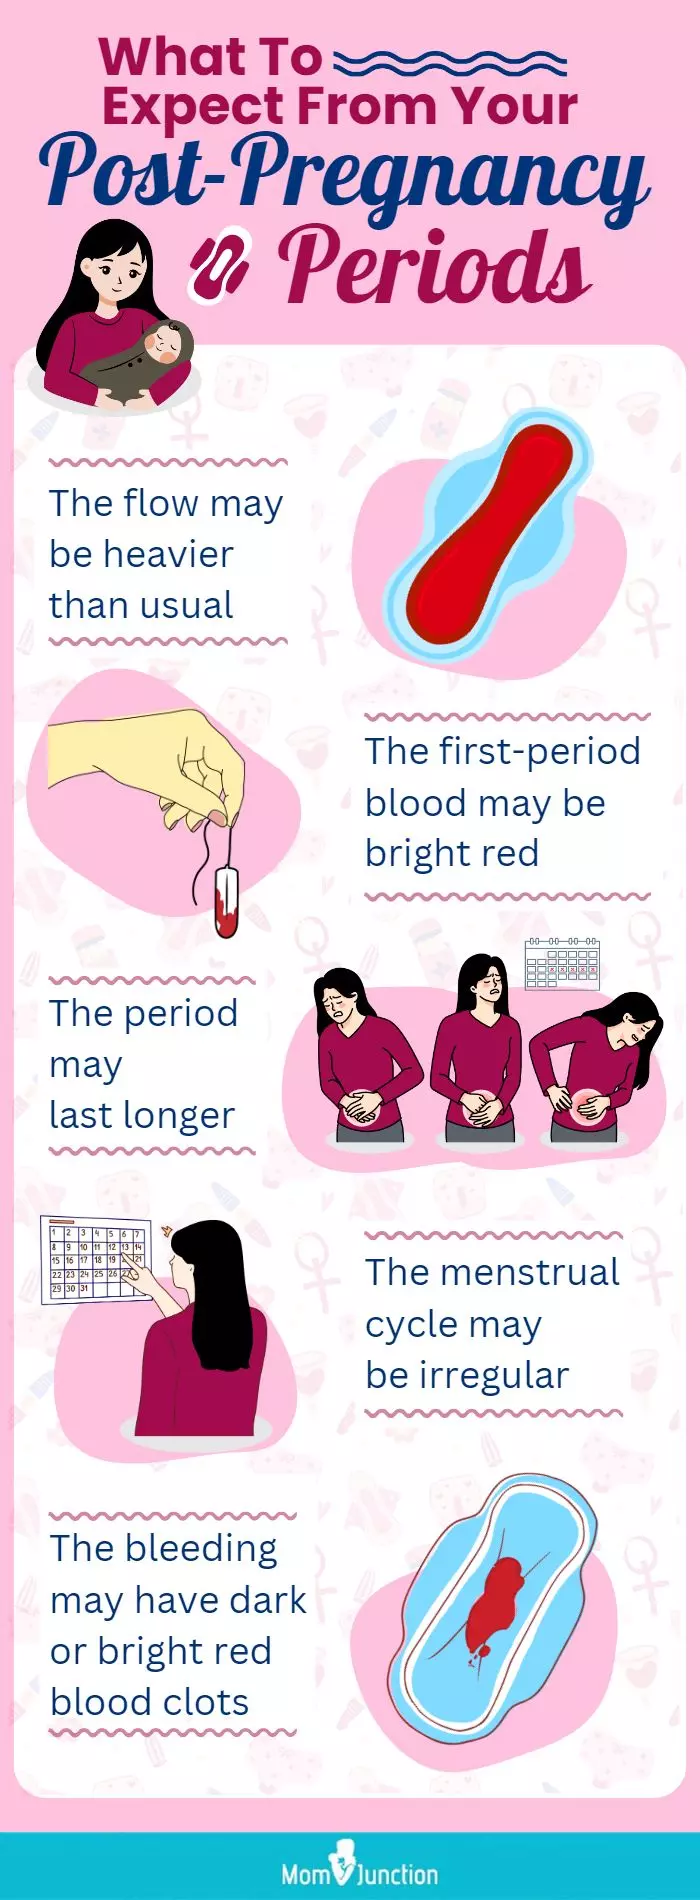 what to expect from your post pregnancy periods (infographic)